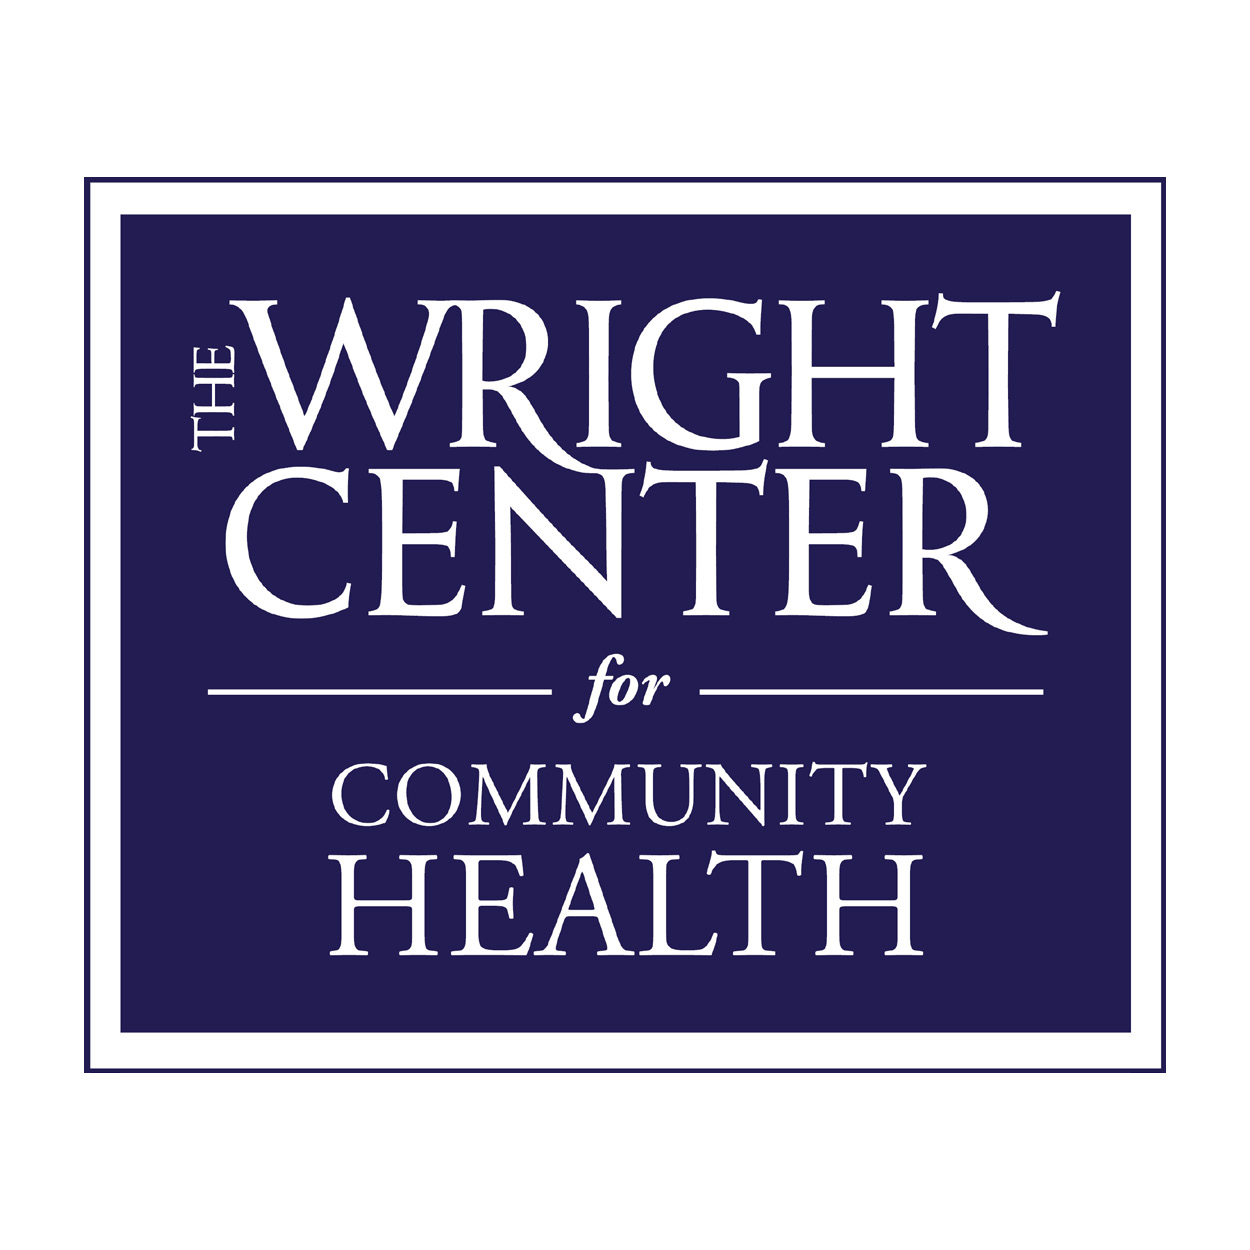 The Wright Center for Community Health